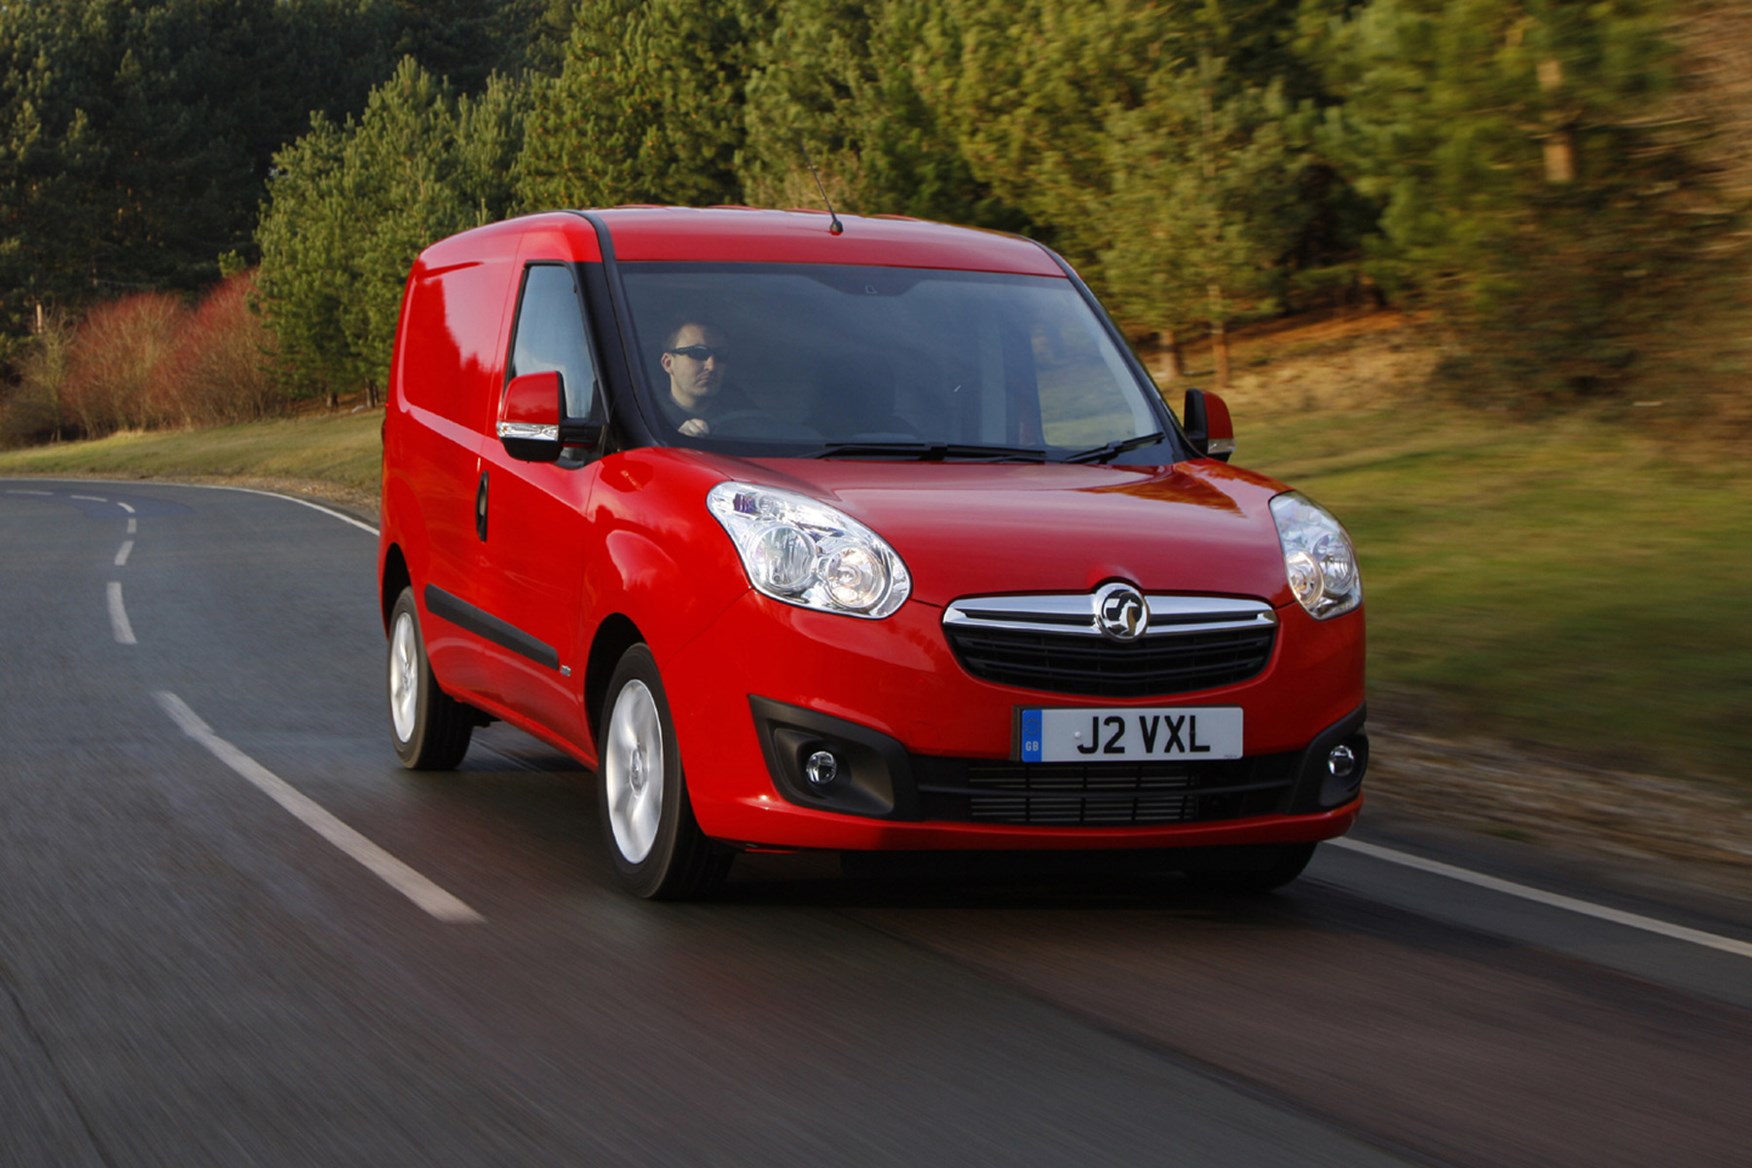 Vauxhall Combo full review on Parkers Vans - on the road